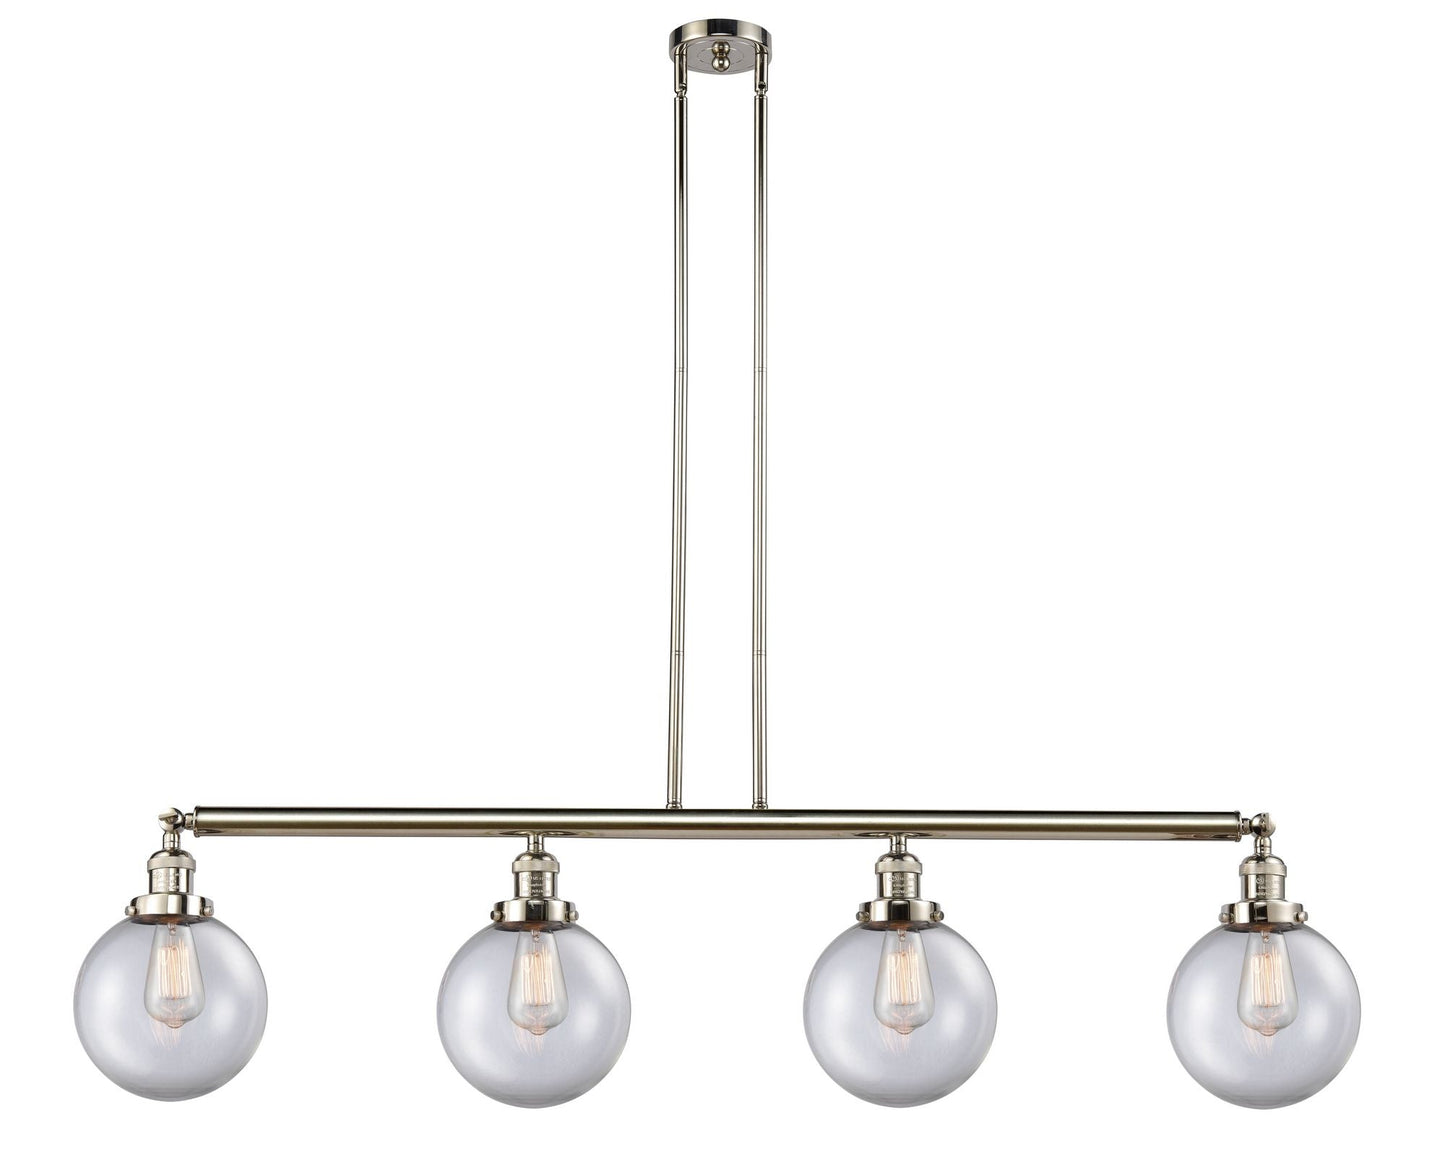 214-PN-G202-8 4-Light 52.625" Polished Nickel Island Light - Clear Beacon Glass - LED Bulb - Dimmensions: 52.625 x 8 x 12.875<br>Minimum Height : 22<br>Maximum Height : 46 - Sloped Ceiling Compatible: Yes